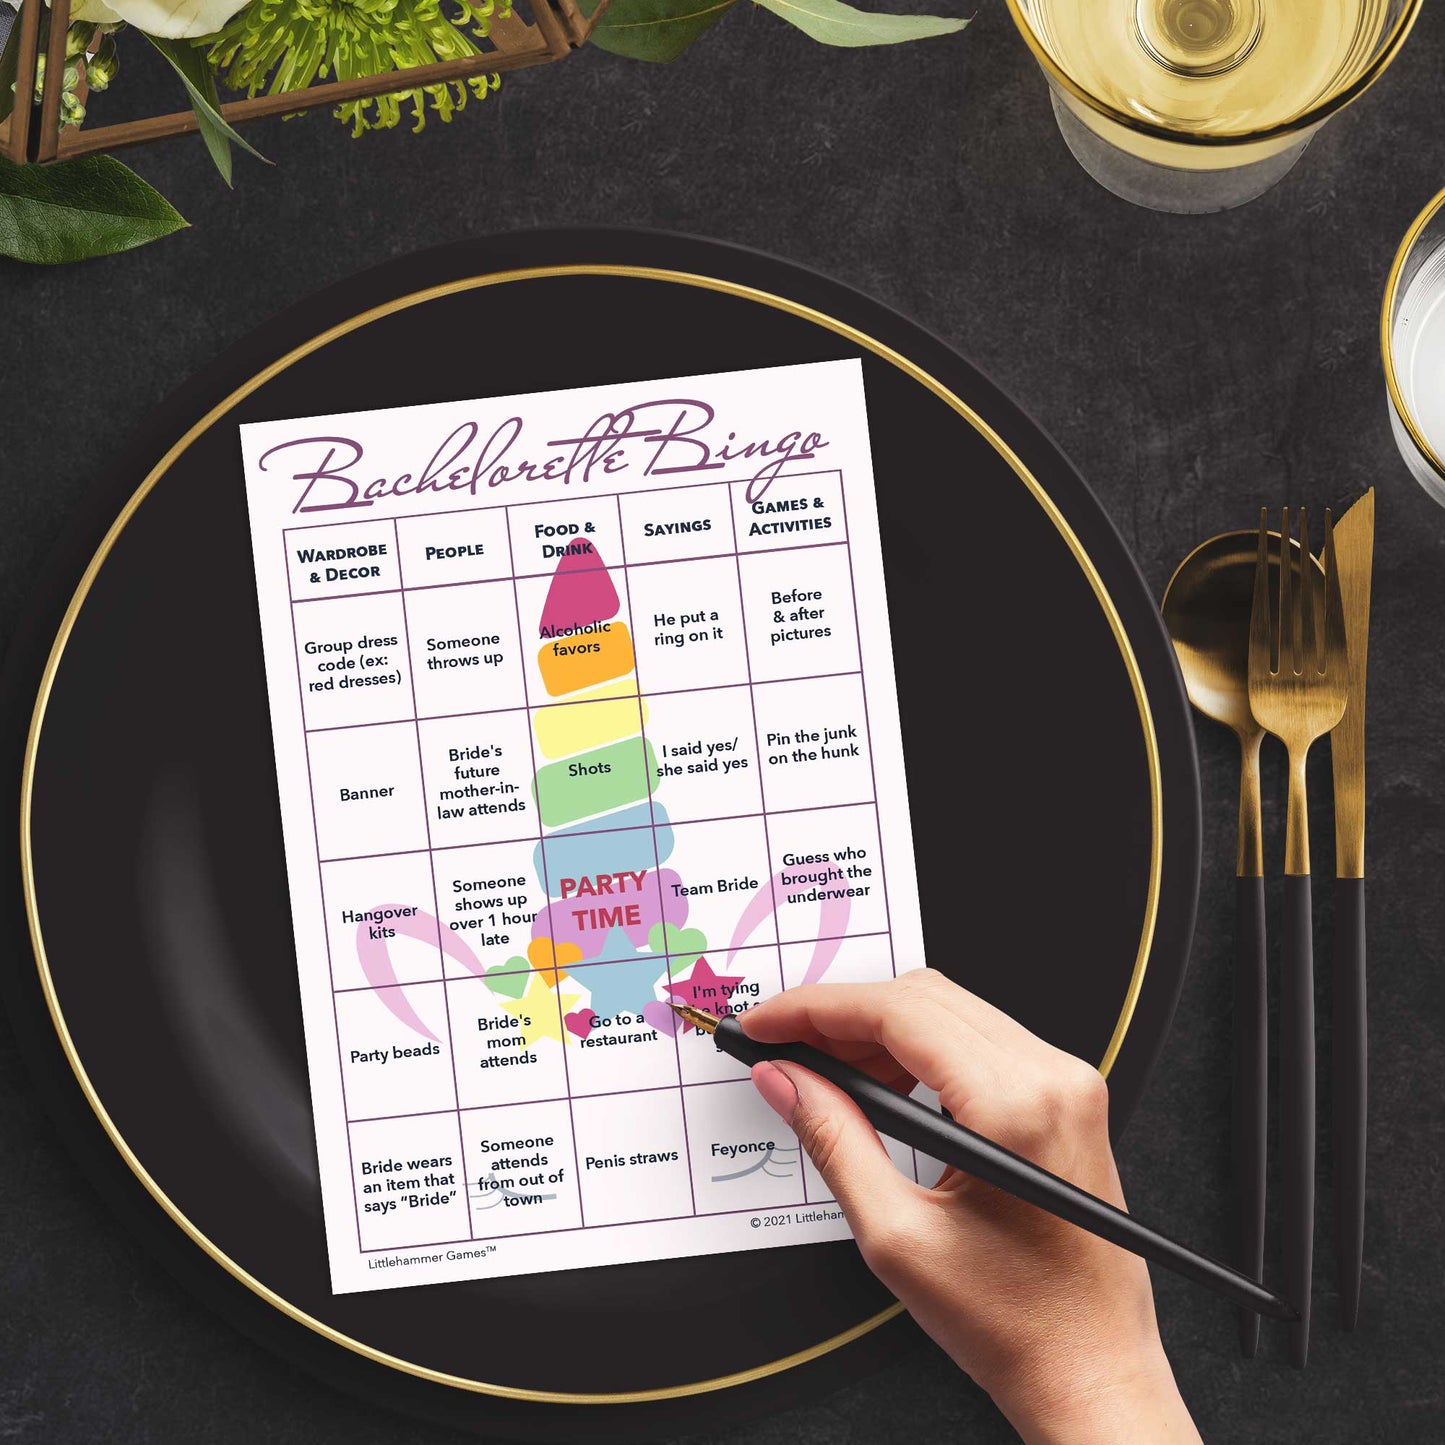 Woman with a pen sitting at a table with a unicorn themed Bachelorette Bingo game card on a gold and black plate on a dark place setting